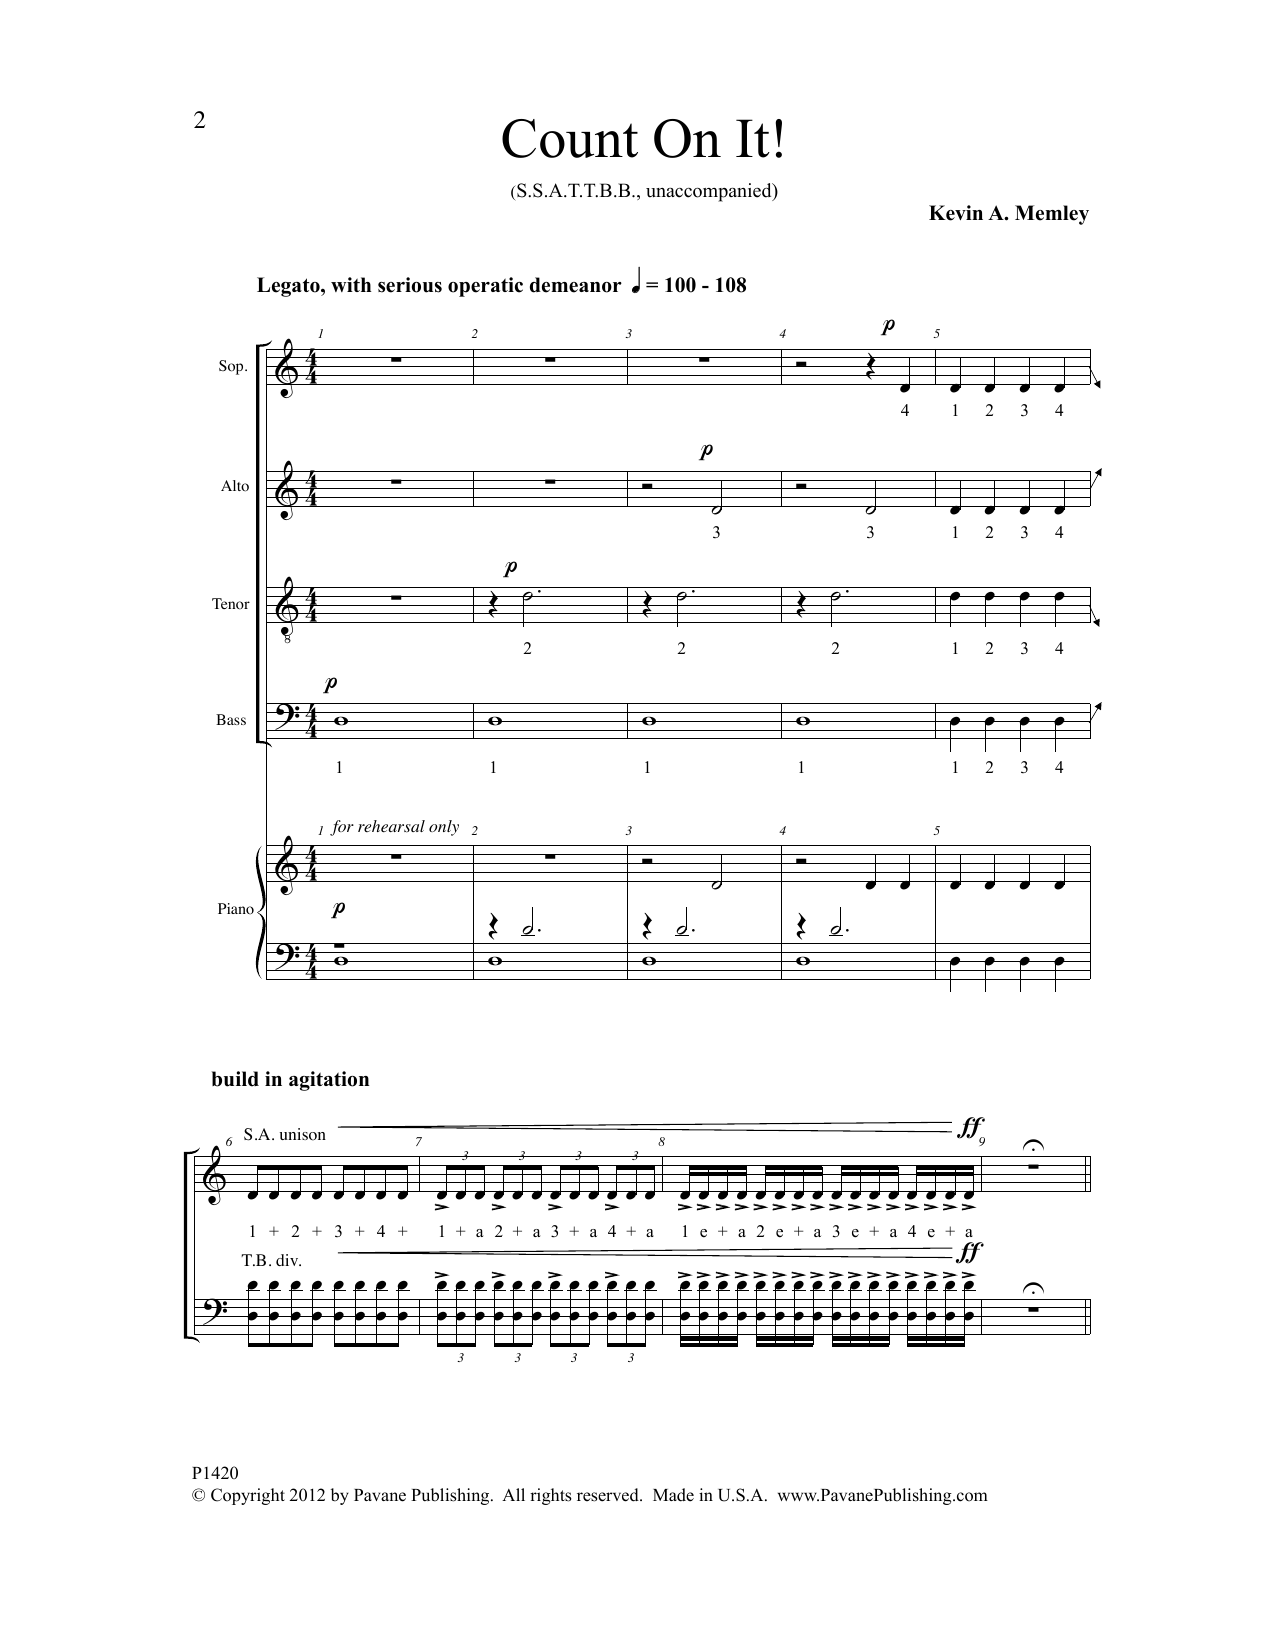 Download Kevin A. Memley Count on It! Sheet Music